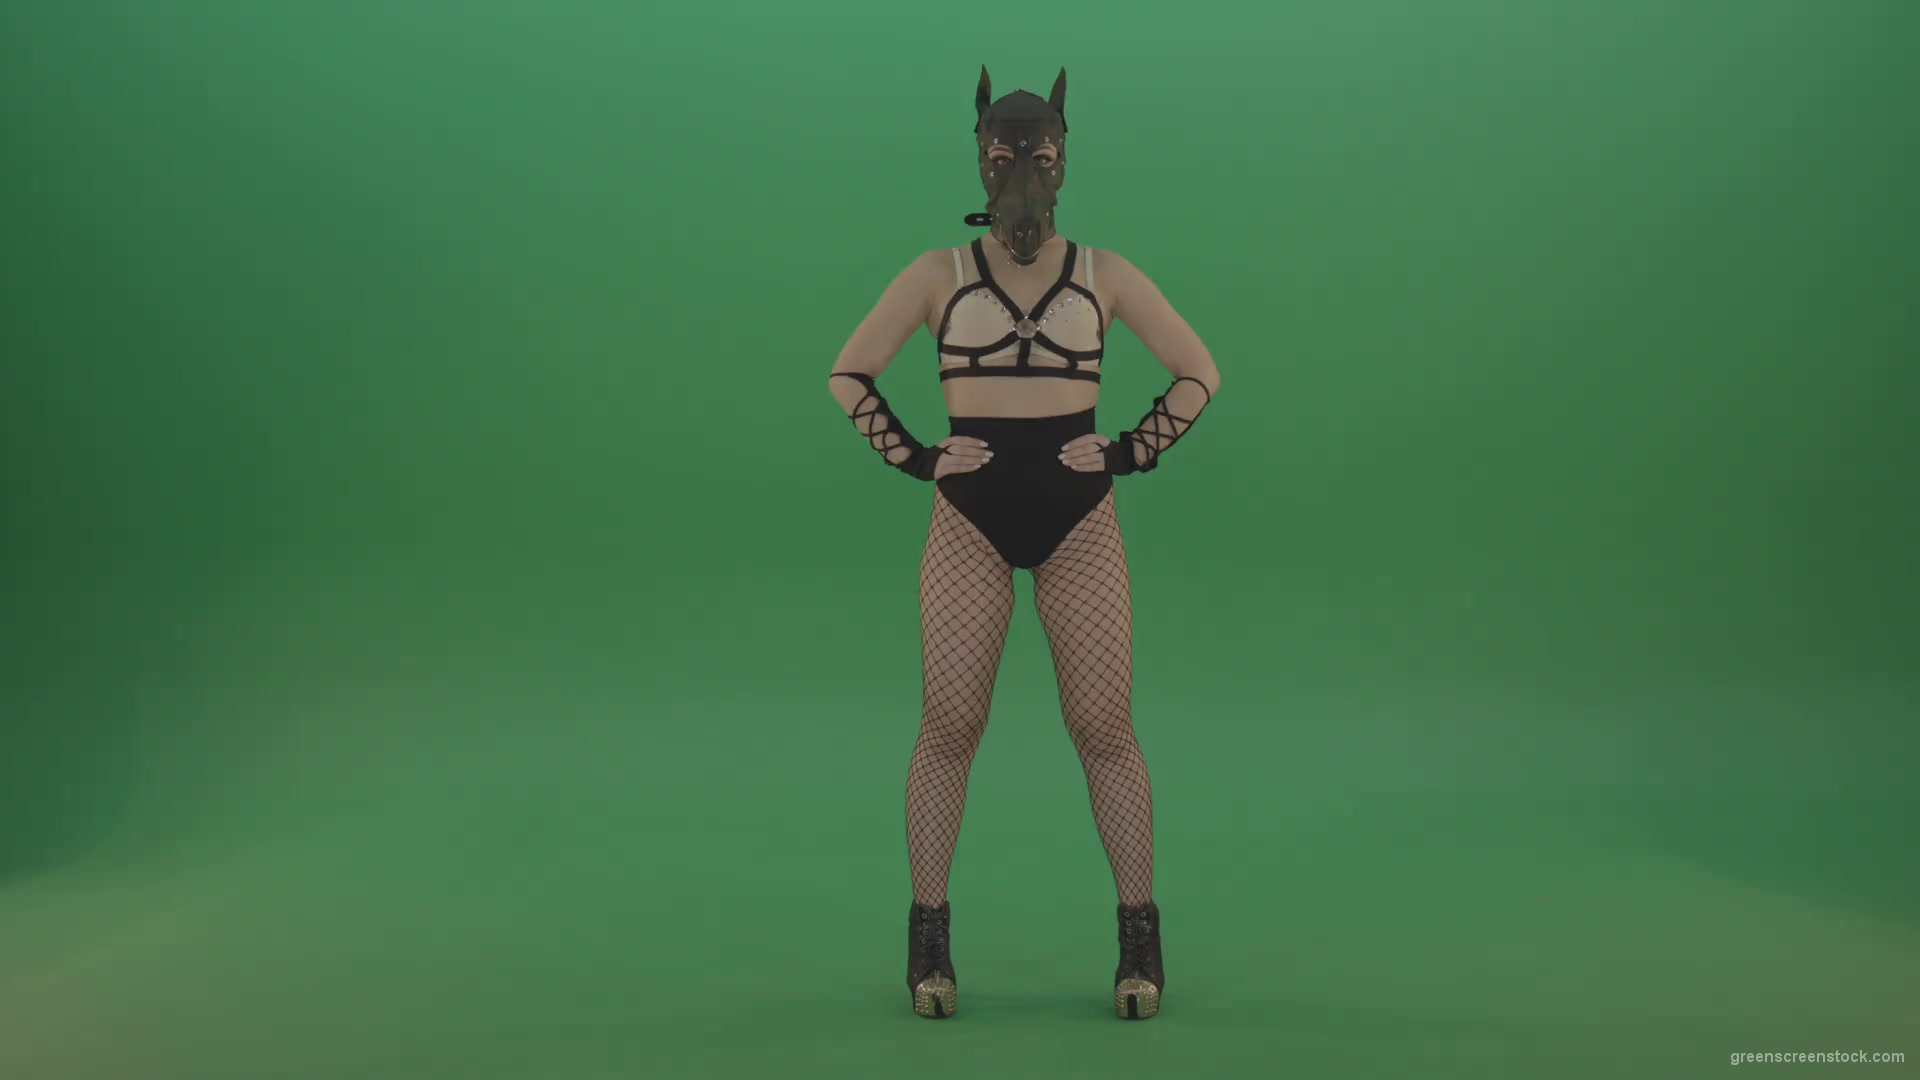 Girl-in-wolf-fetish-mask-sit-down-and-stand-up-making-hand-beat-on-green-screen-1920_001 Green Screen Stock